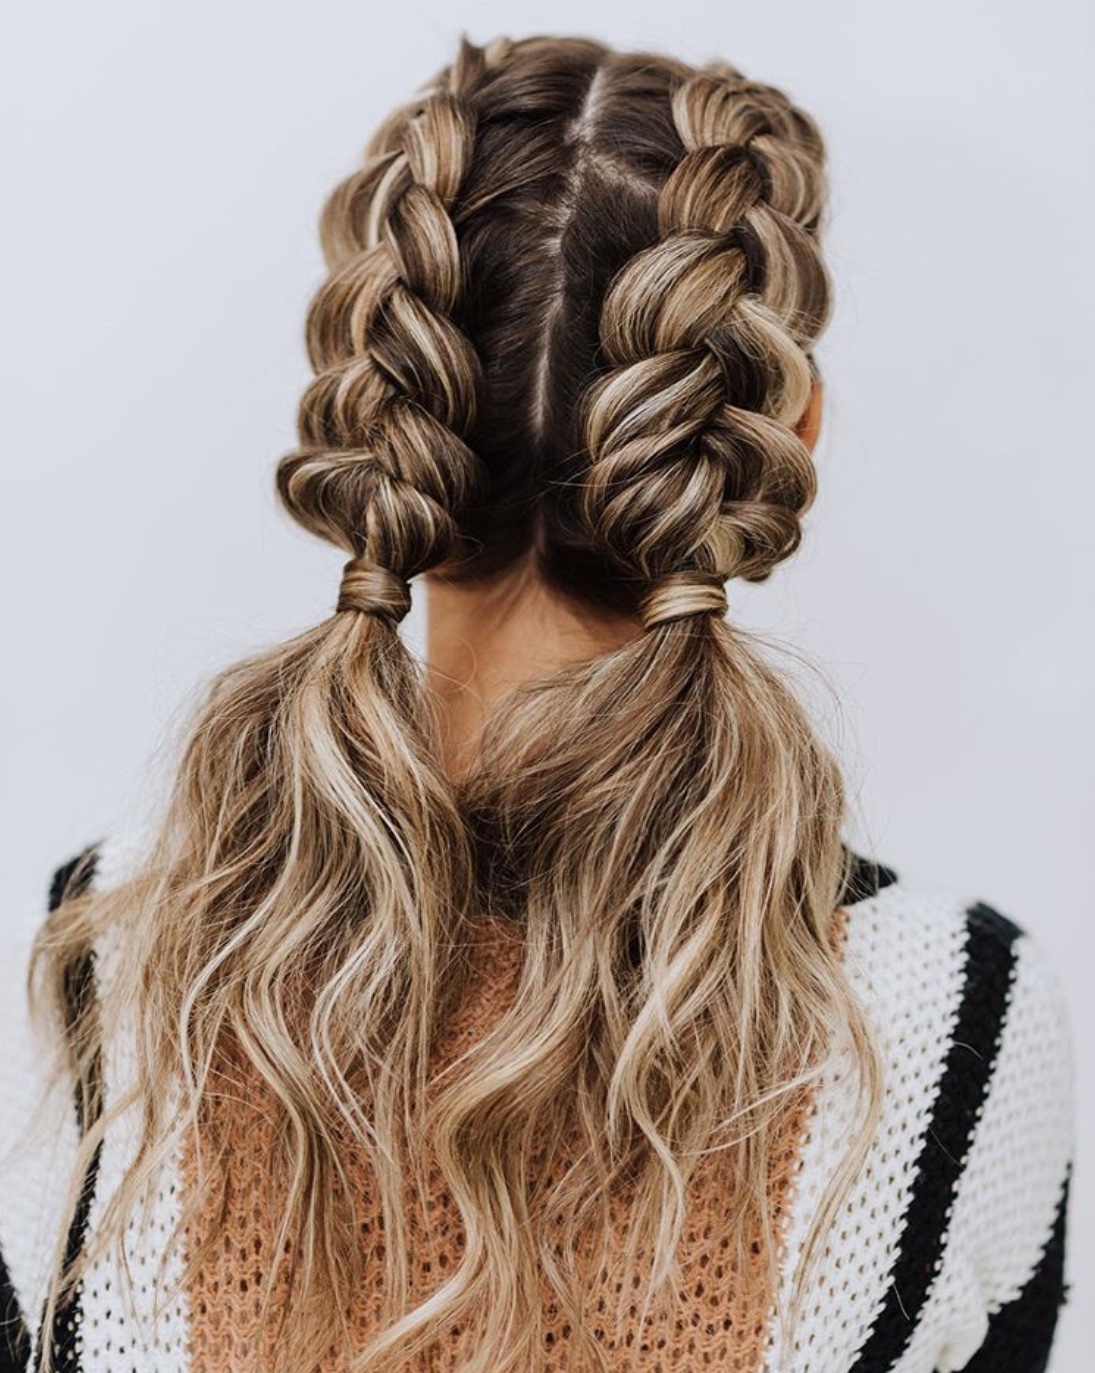 14 Easy Braided Hairstyles For Long Hair - The Glossychic